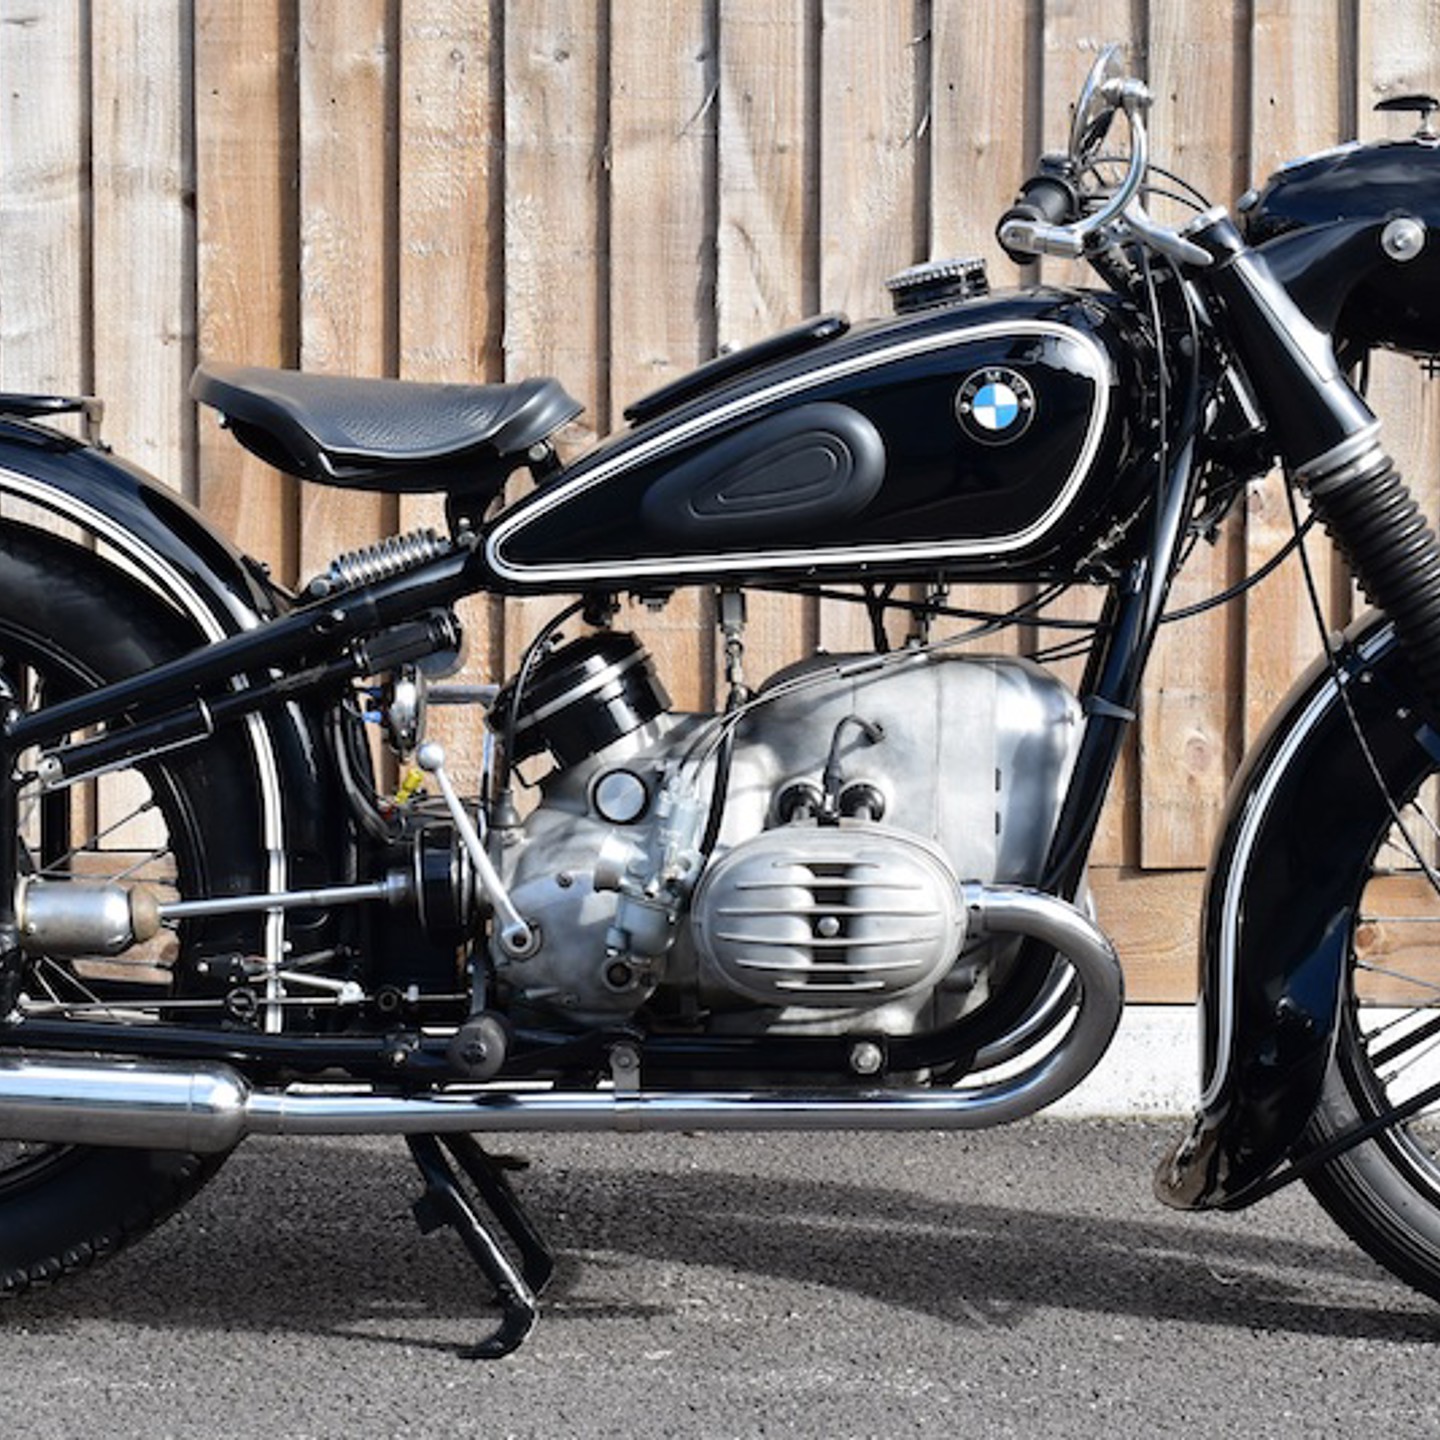 1951 BMW R513 Motorcycle Sold For £16,128